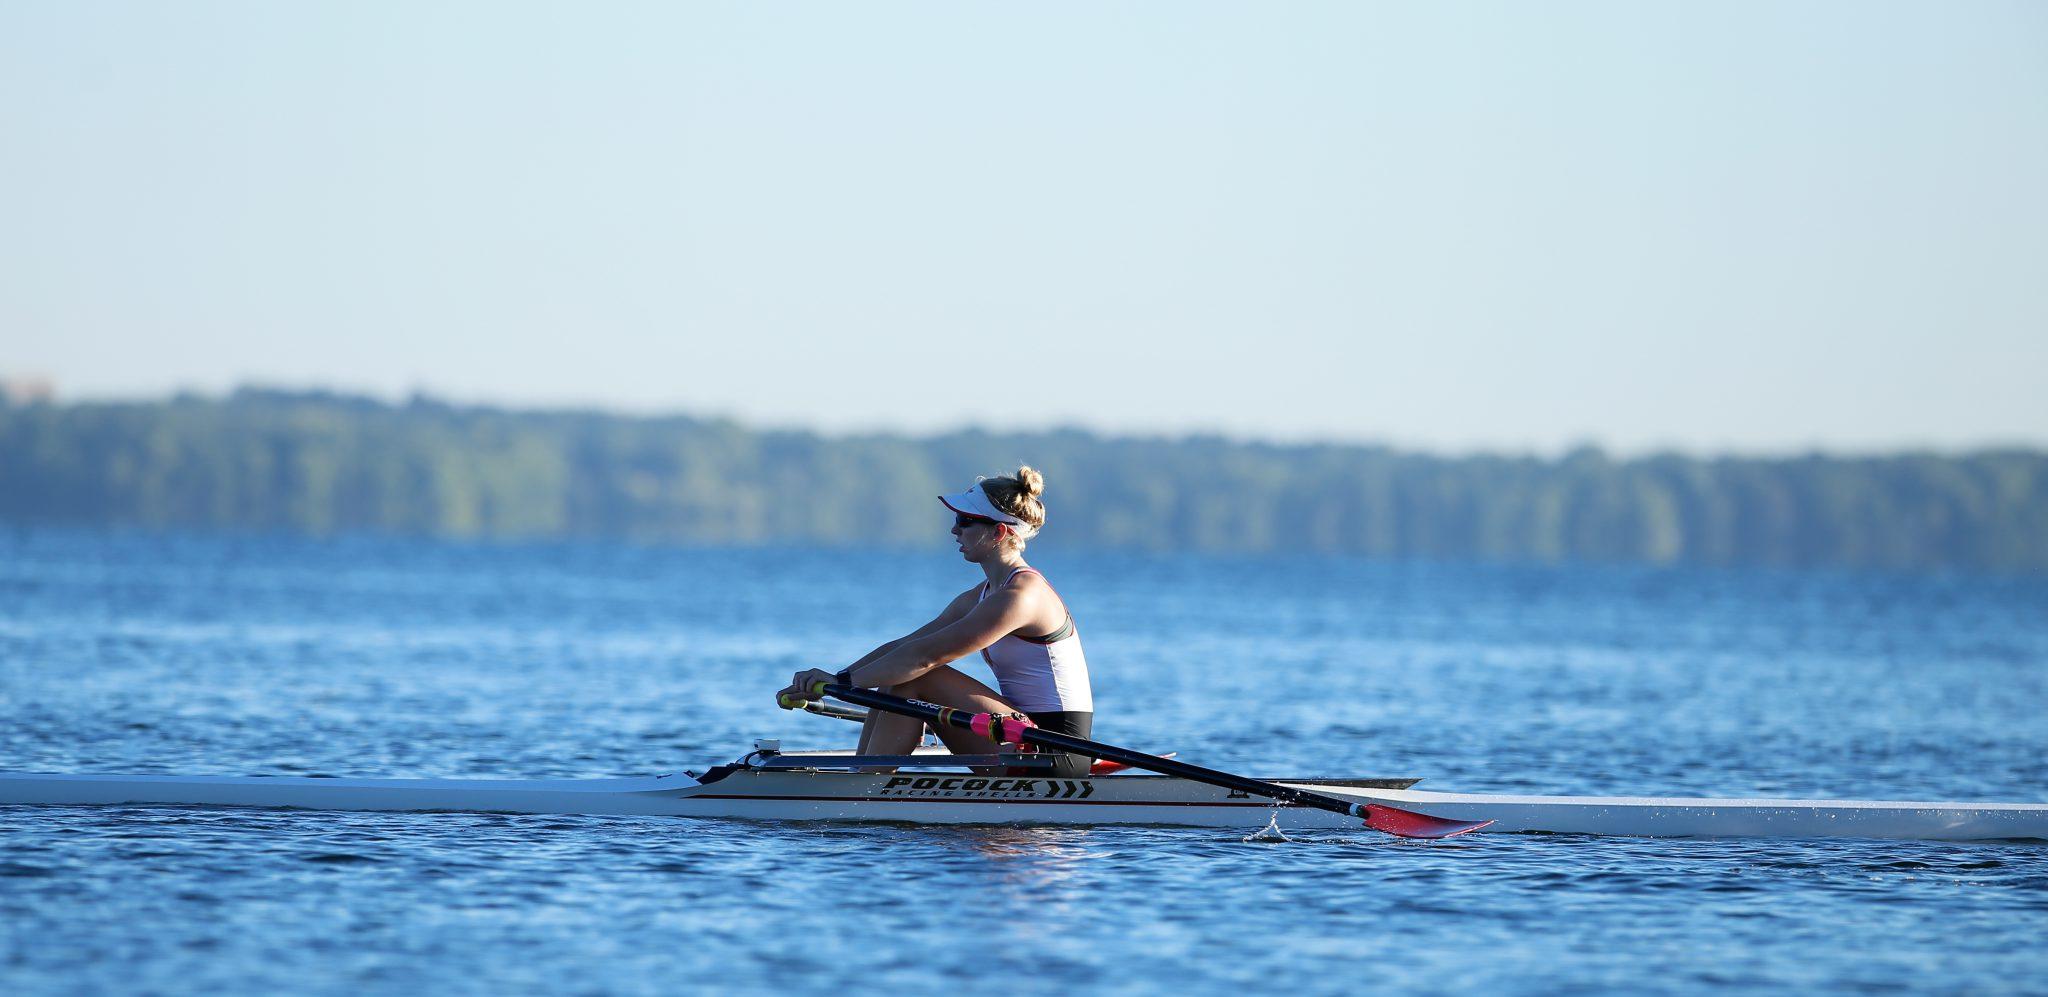 Badgers In Tokyo Maddie Wanamaker Aims To Make A Splash In Olympic Rowing Debut The Badger Herald